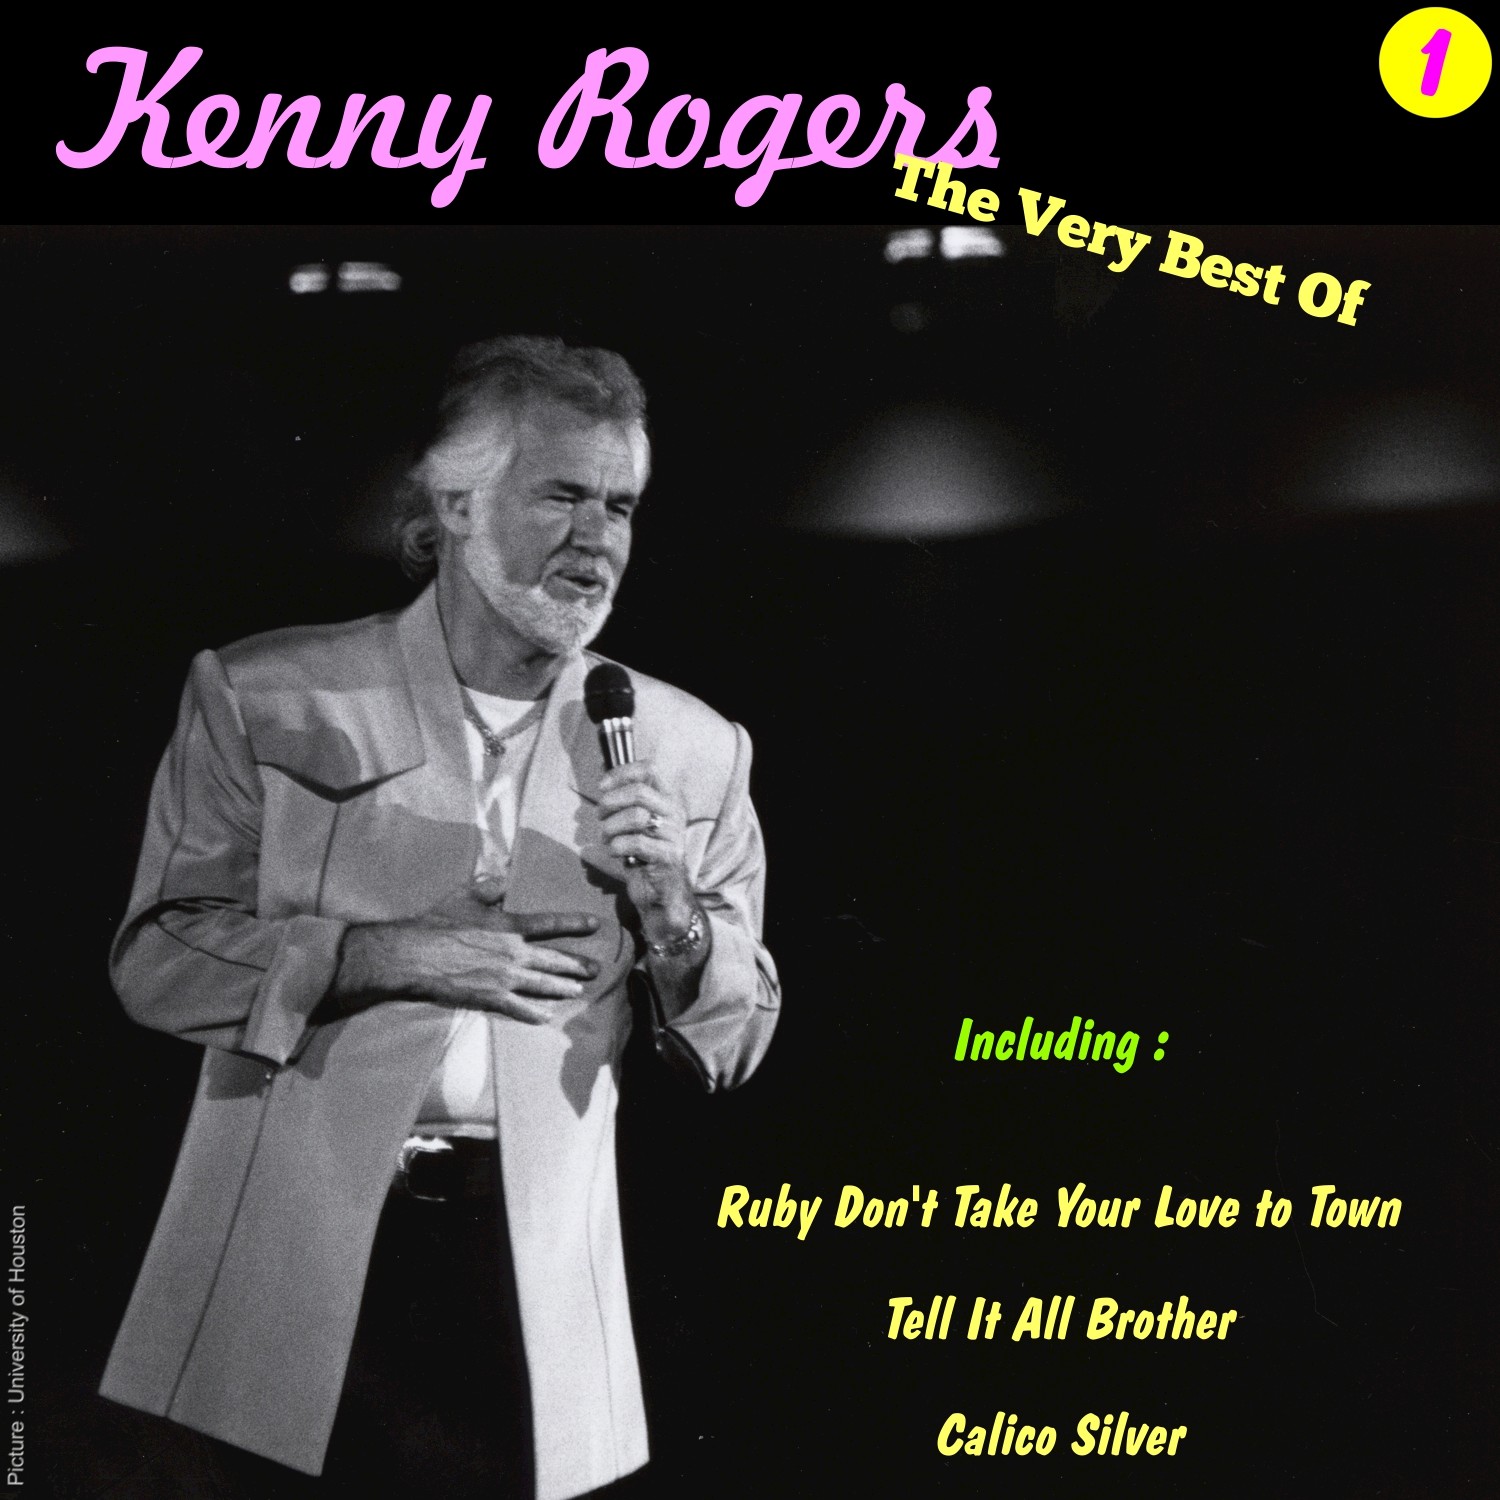 Kenny Rogers, the Very Best of,  Vol.1